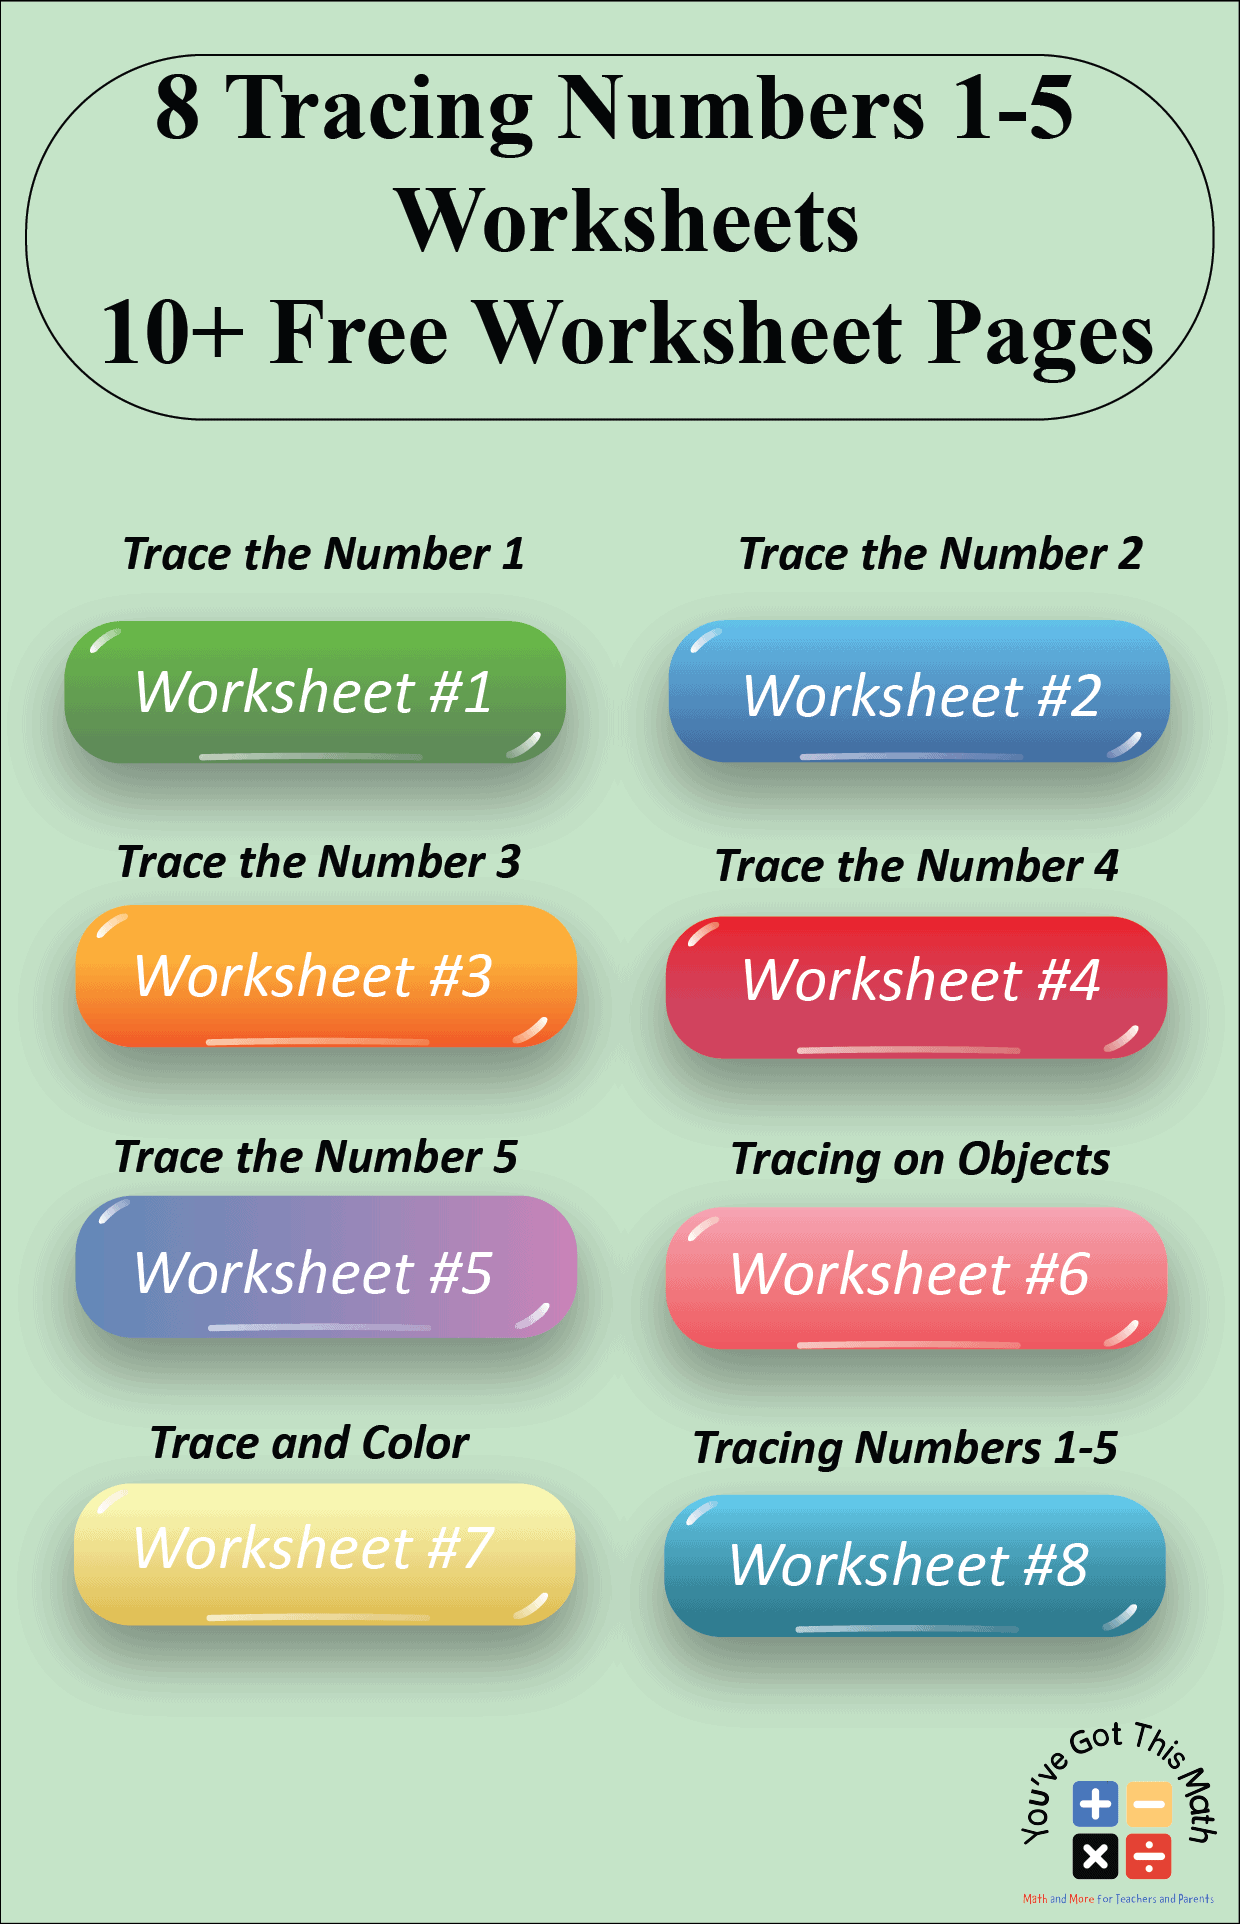 10+ Free Tracing Numbers 1-5 Worksheets-01